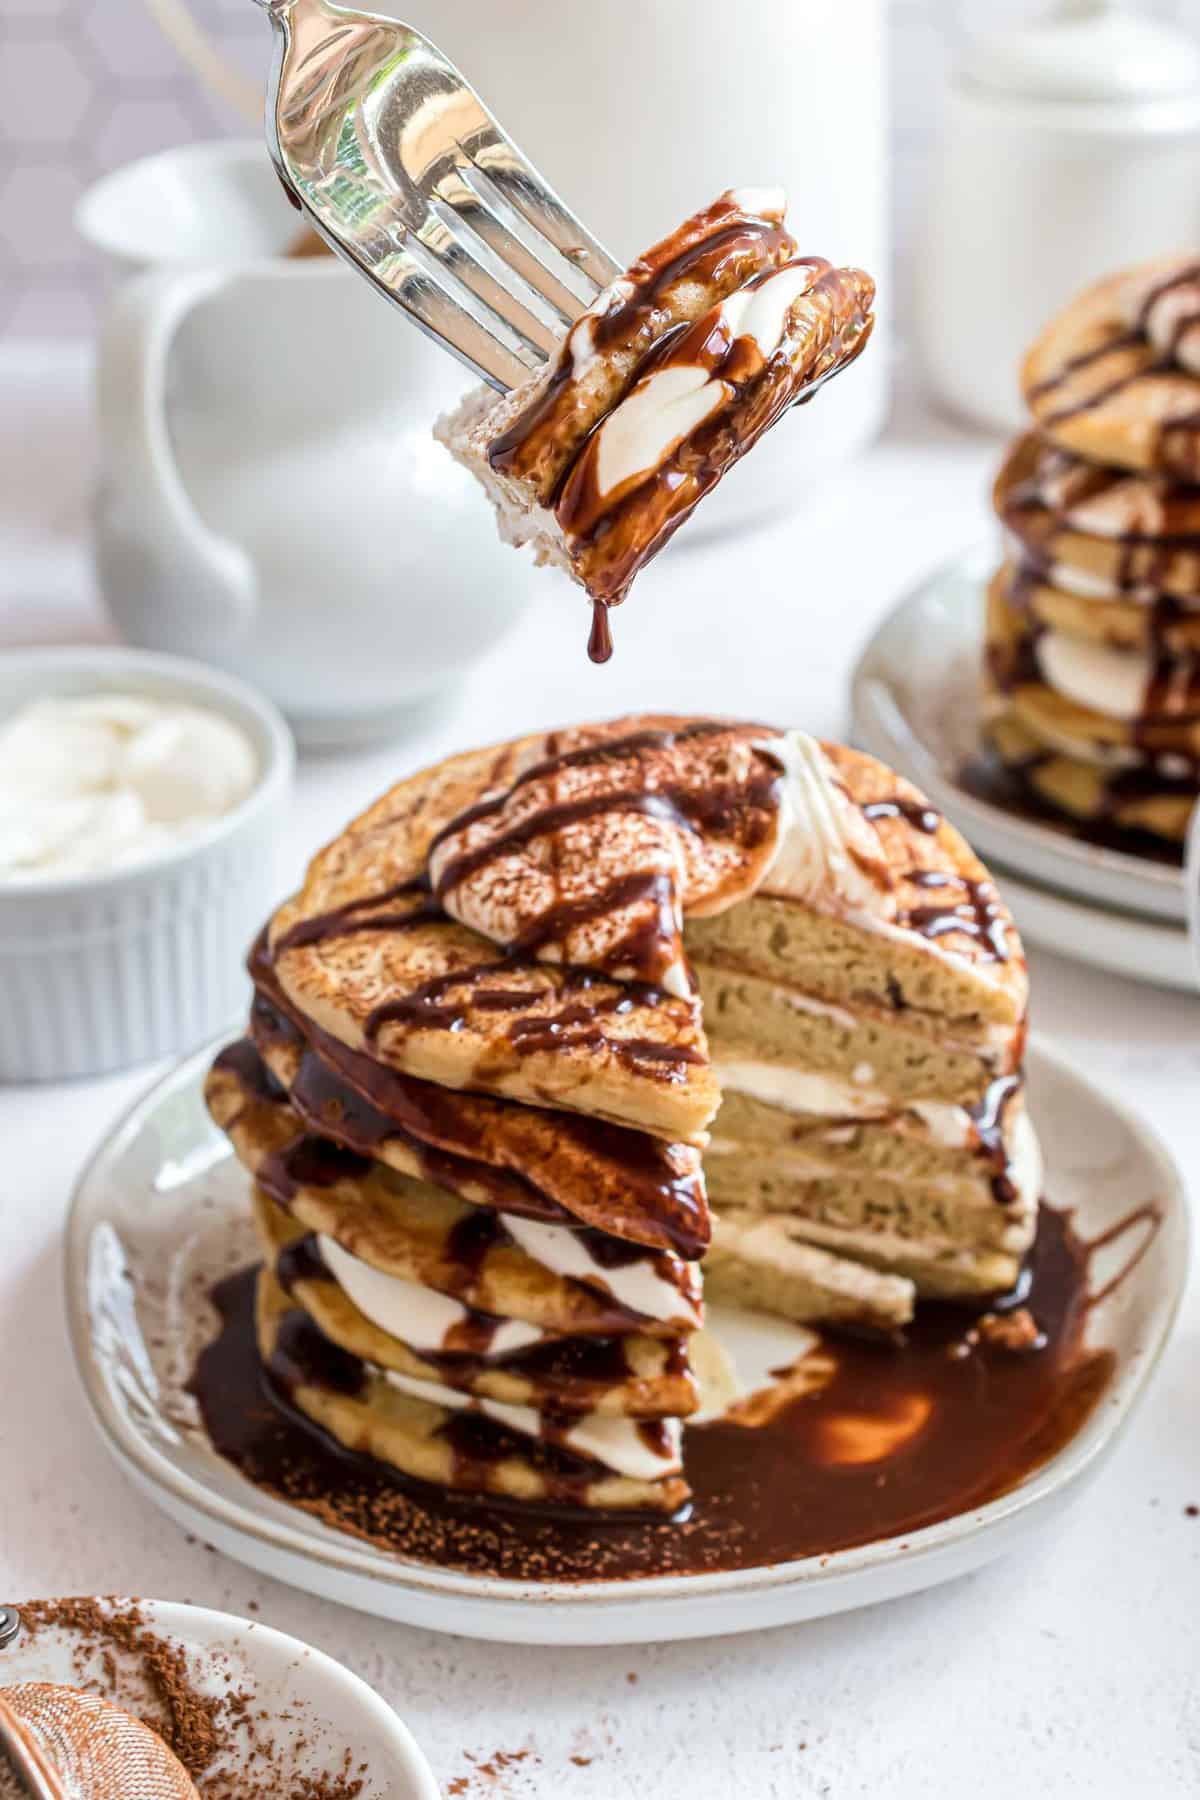 Pancakes on a fork, dripping with kahlua syrup.